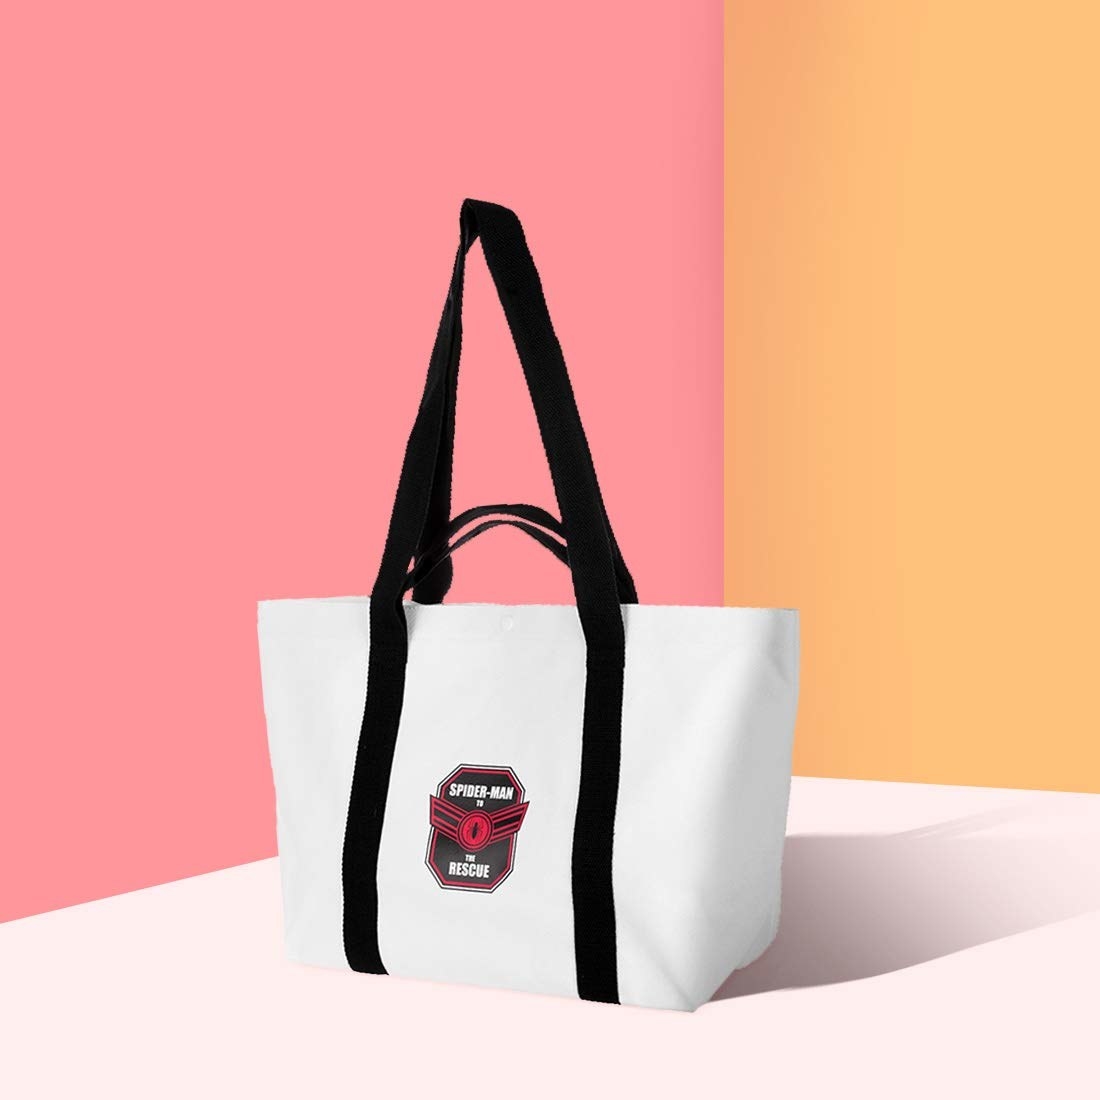 A white tote bag with a small emblem that says &#x27;Spiderman&#x27; to the rescue.